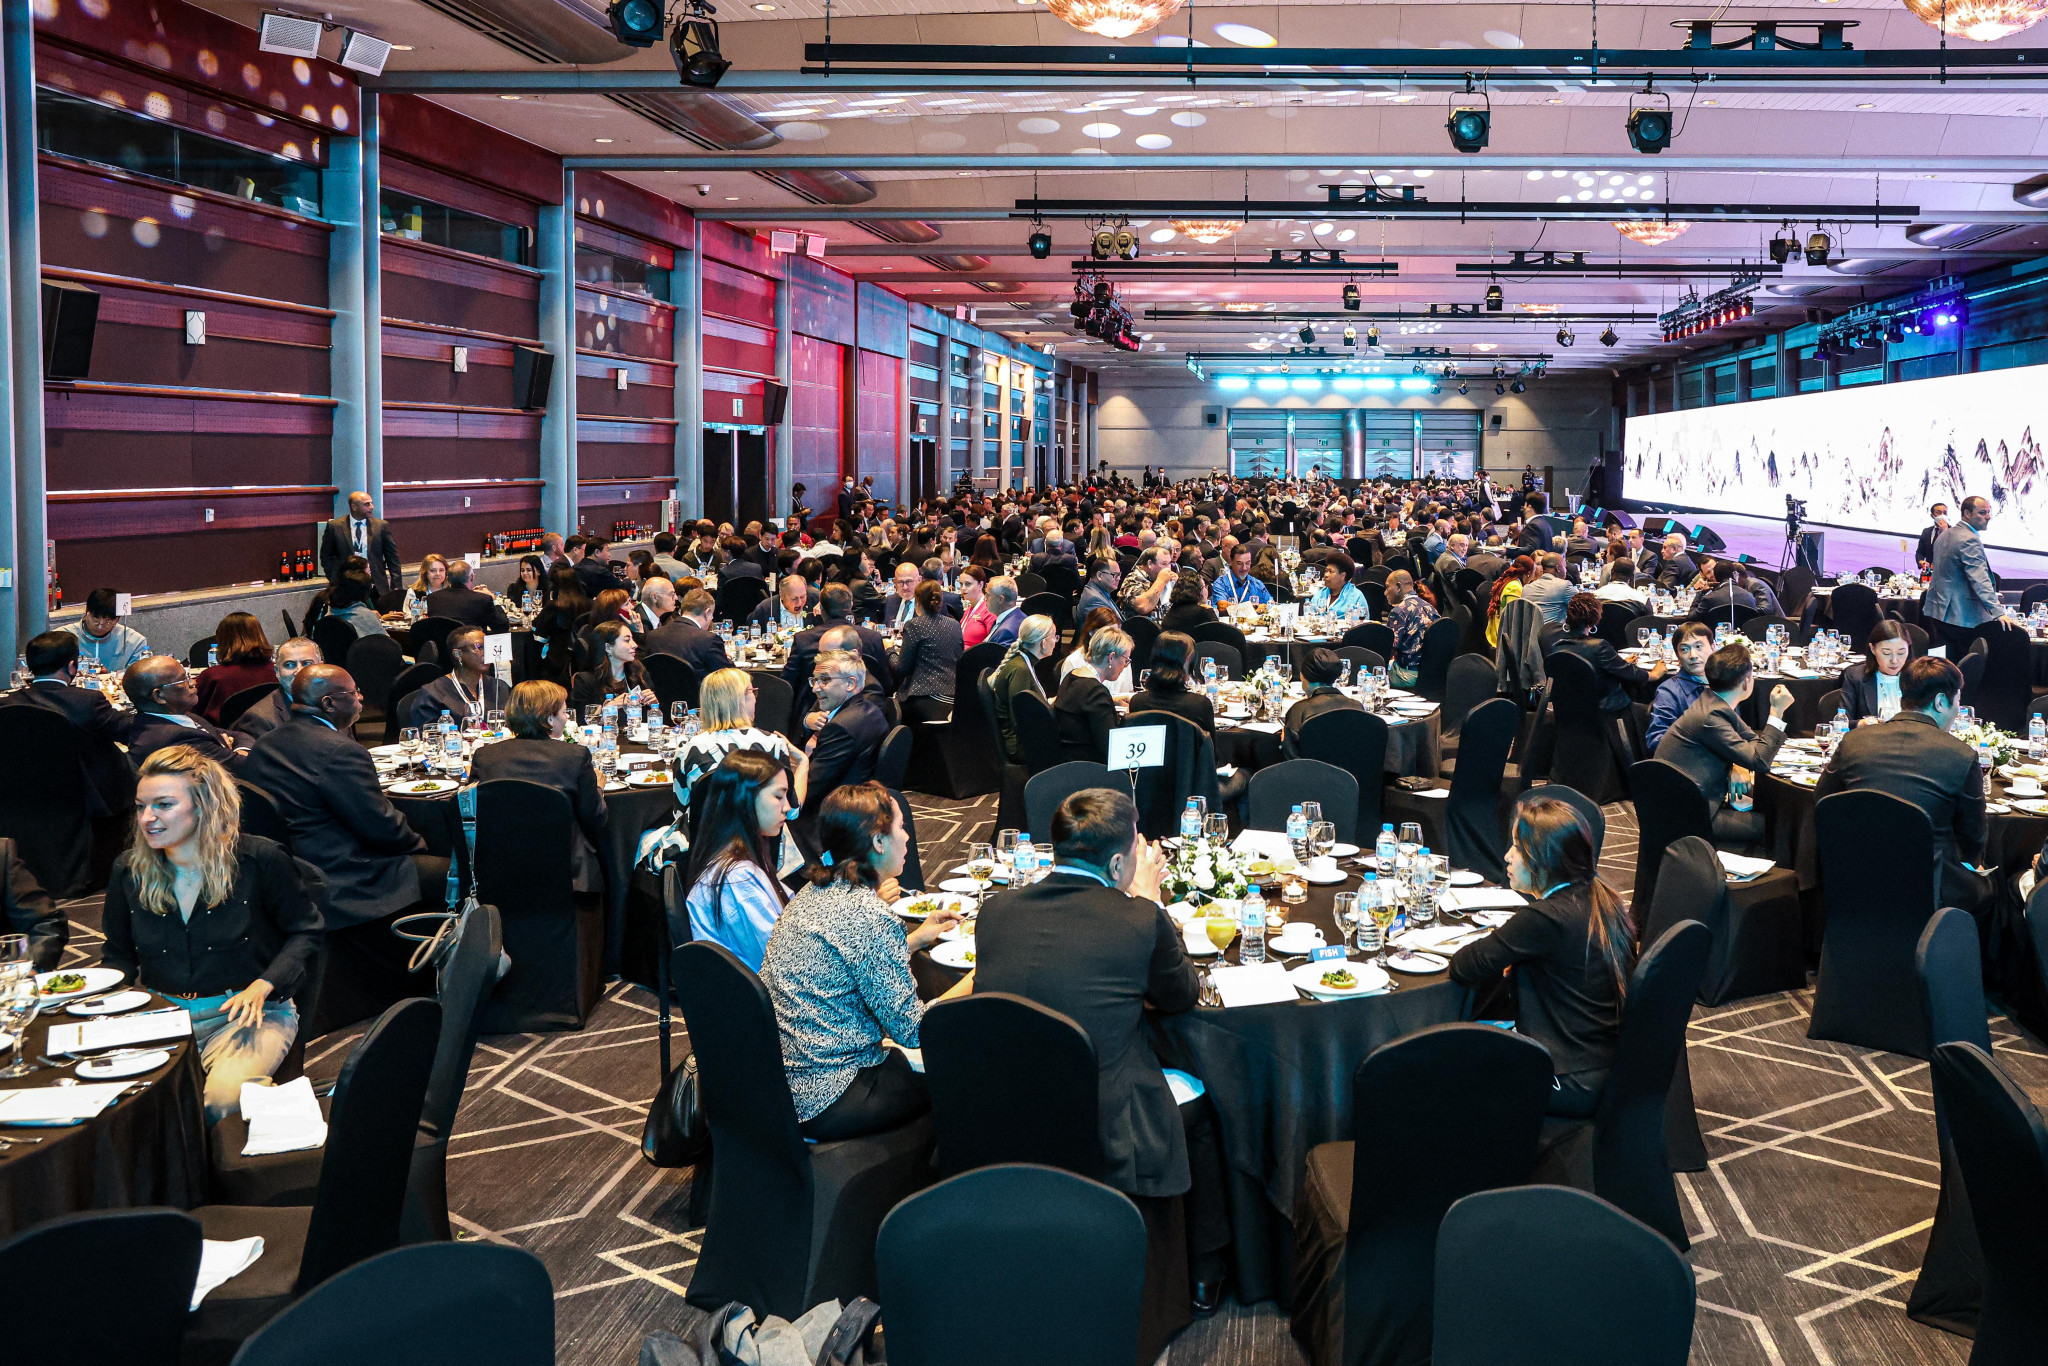 The banquet hall at the Coex Convention and Exhibition Center was the venue for the dinner ©ANOC